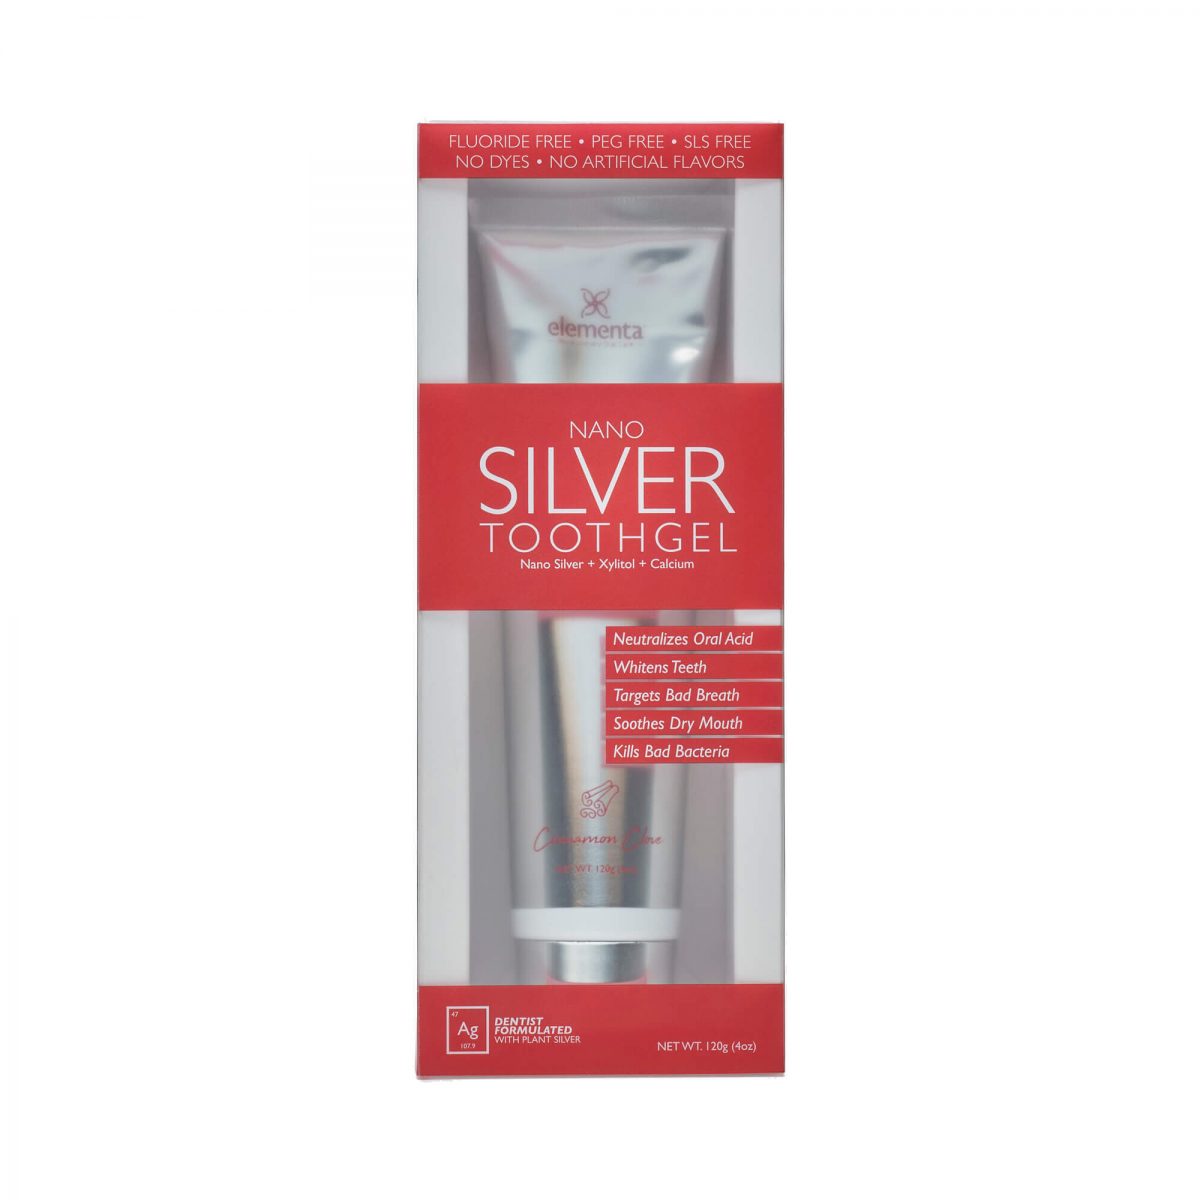 Elementa nano silver tooth gel tub cinnamon clove flavored with red labeling and transparent packaging with red design